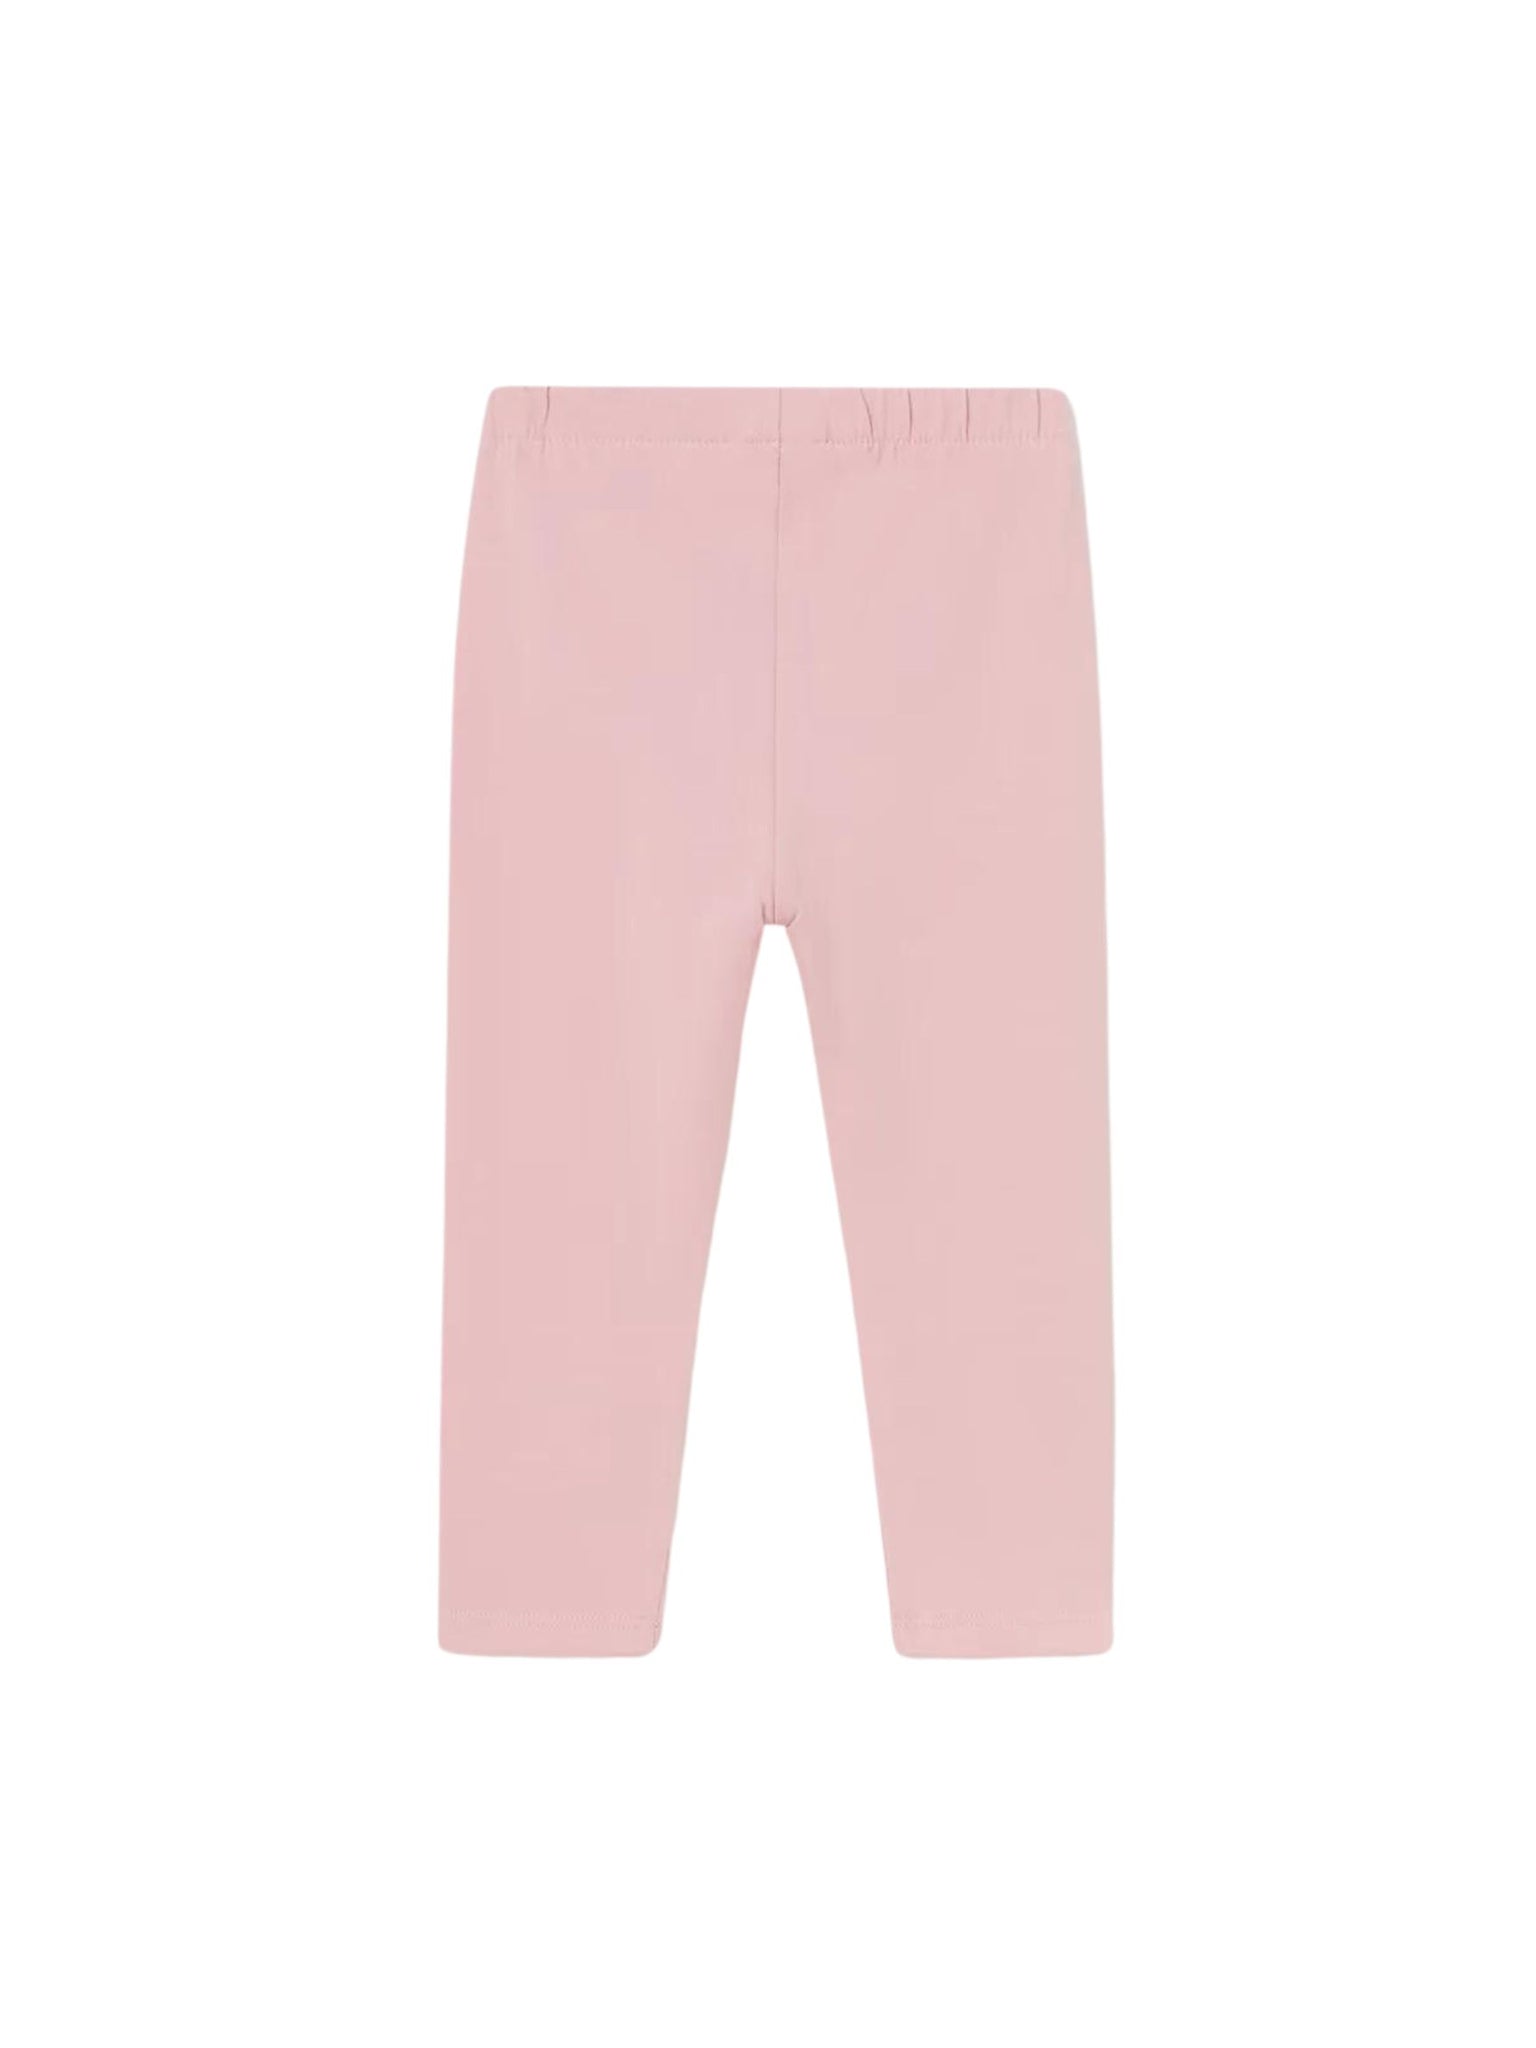 oh baby! Bow Leggings - Pale Pink